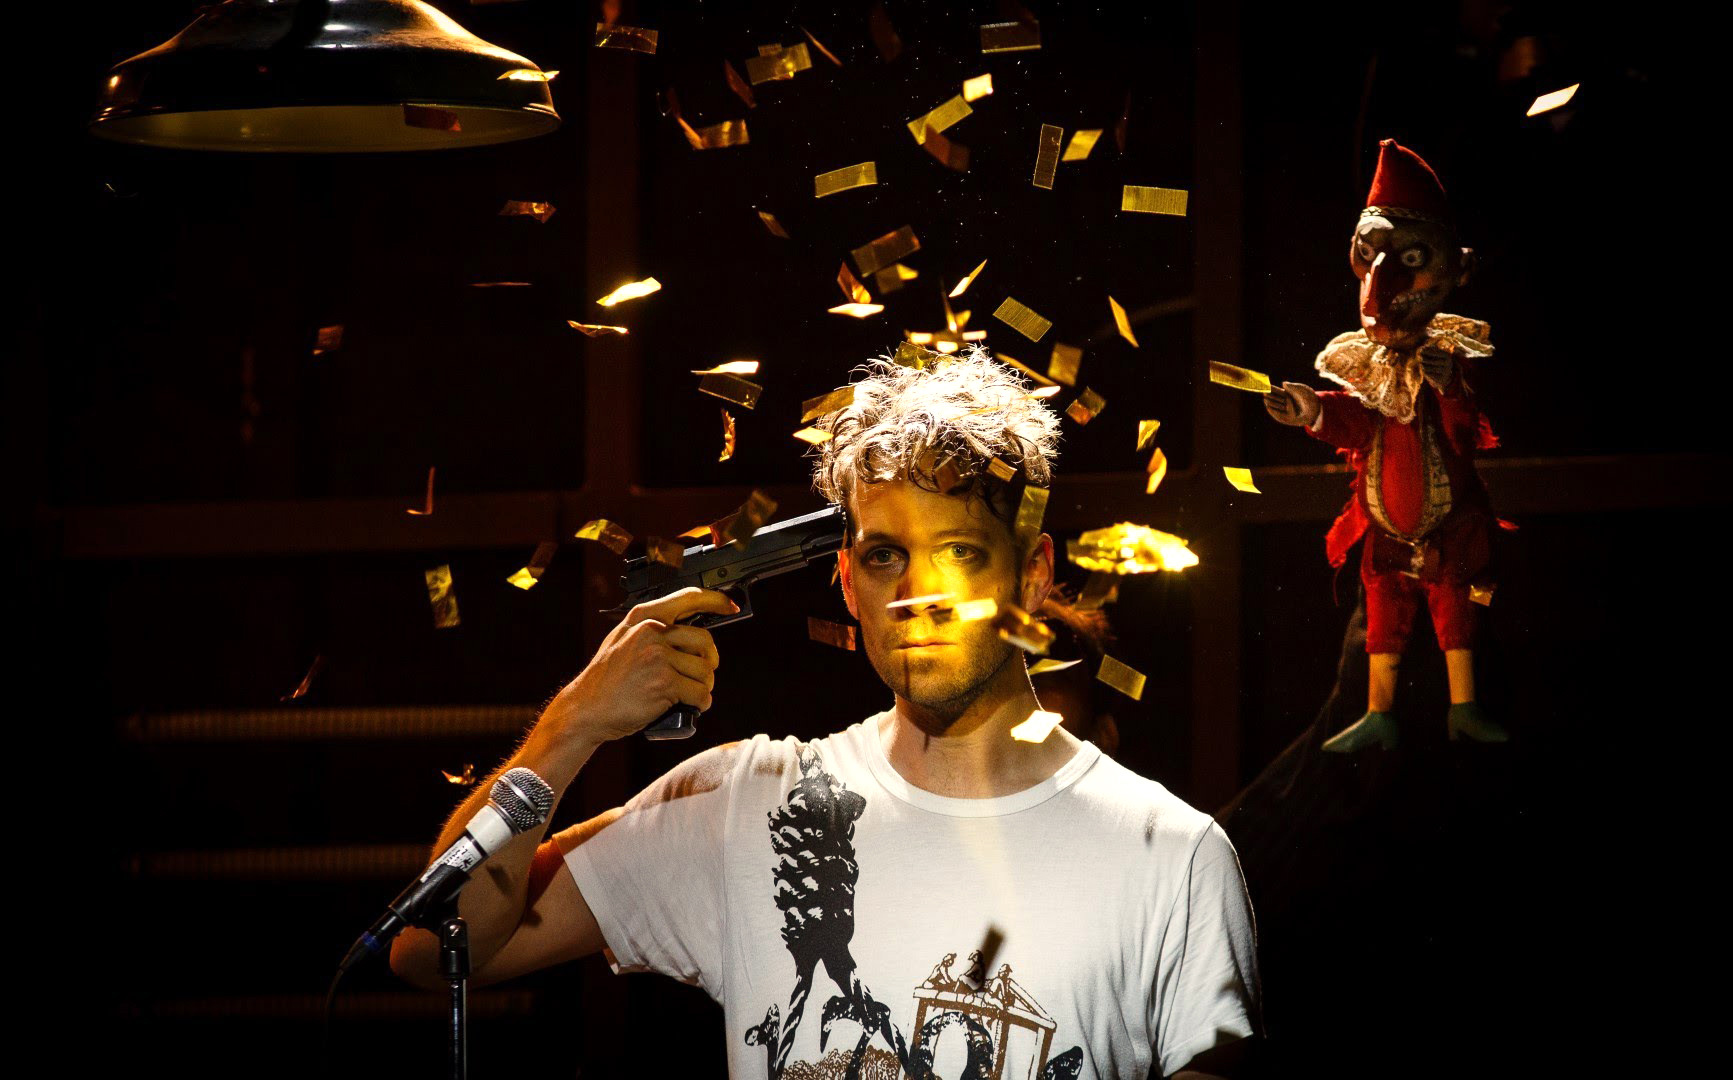 A man holding a gun in front of confetti.